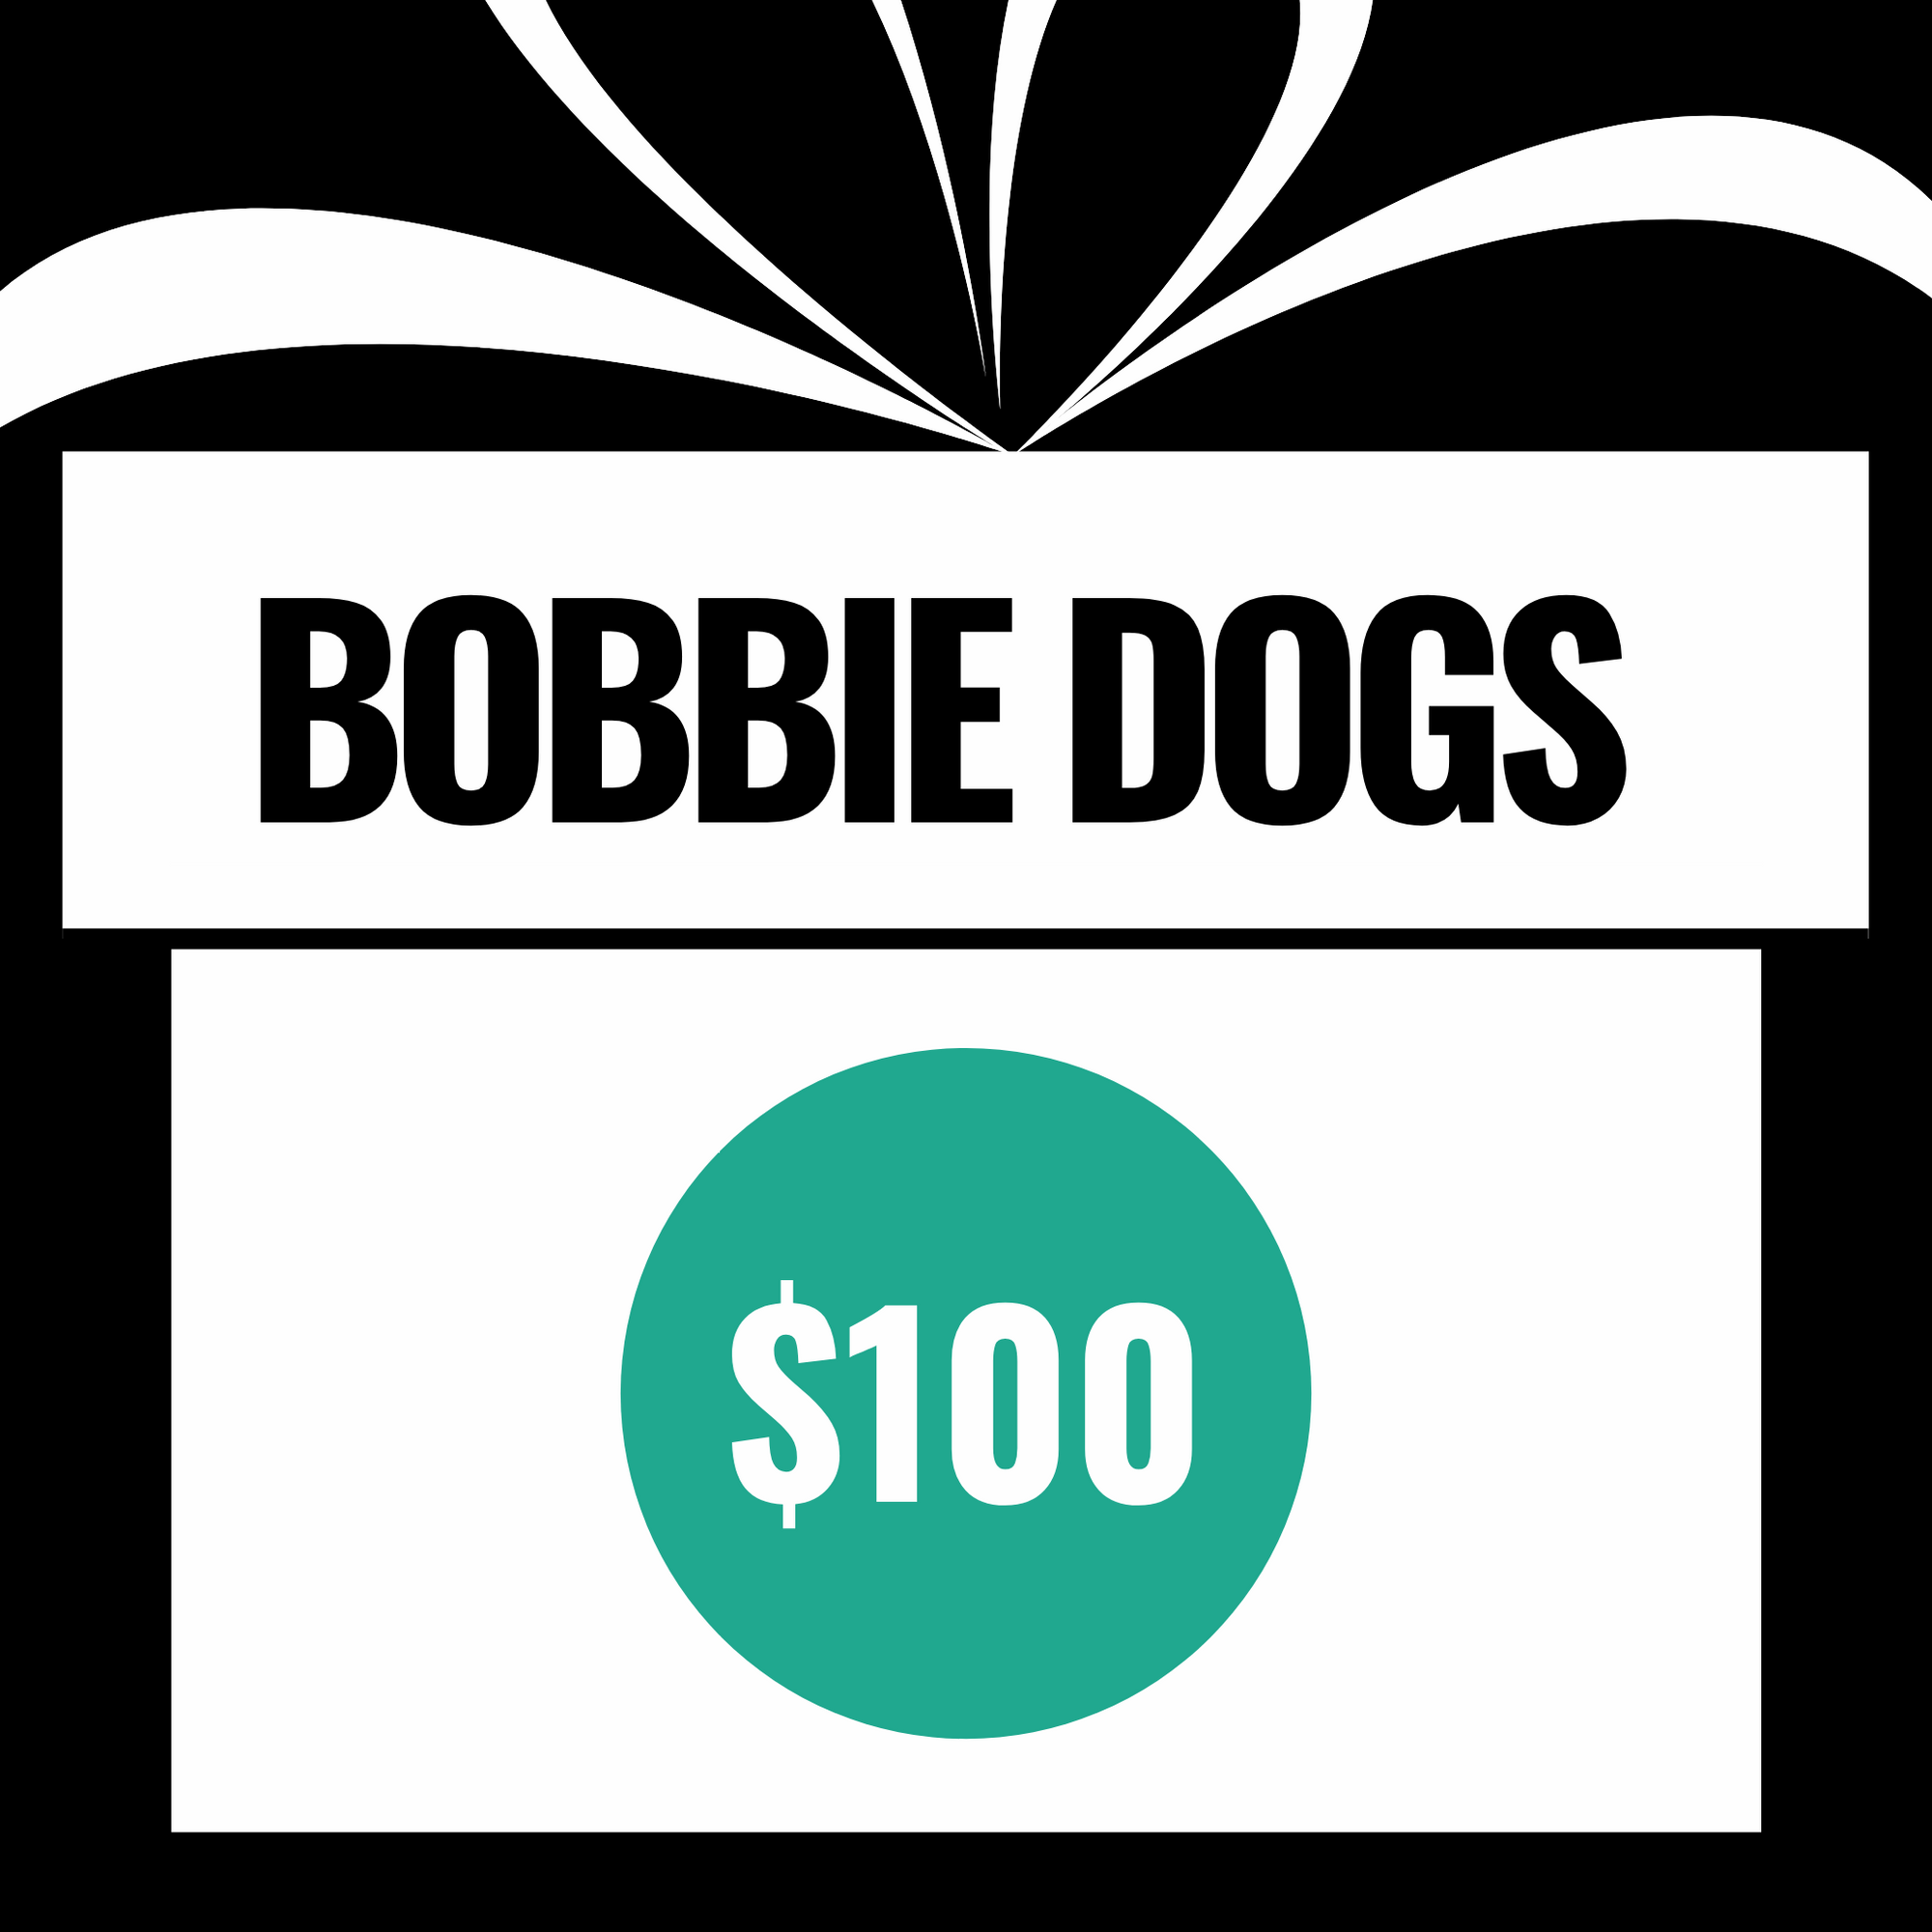 Bobbie Dogs Gift Cards!